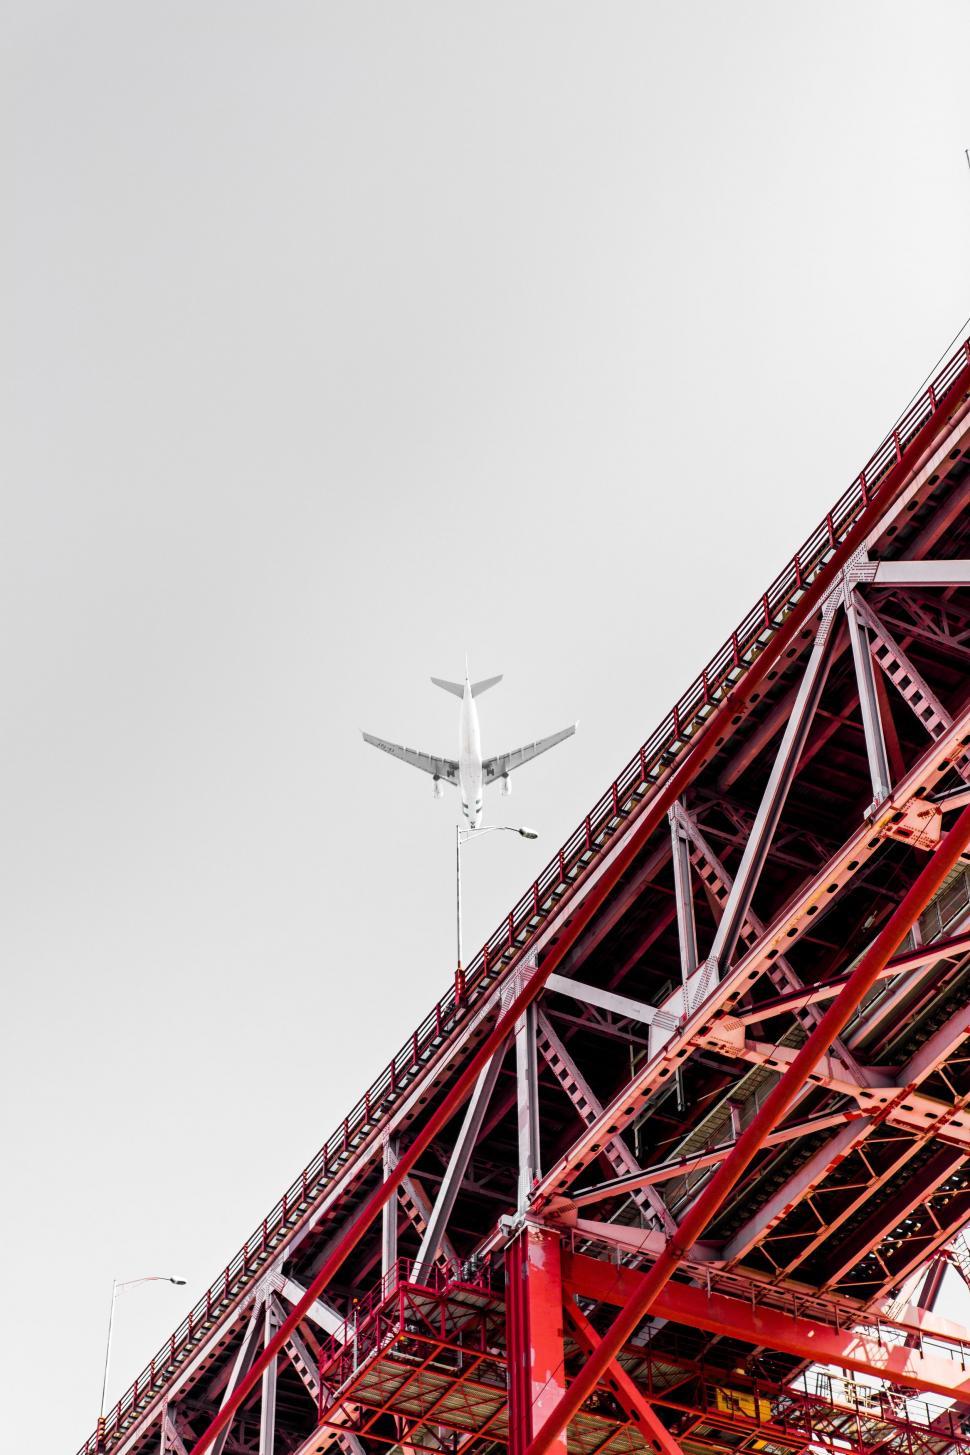 Free Image of Airplane Flying Over Red Bridge 